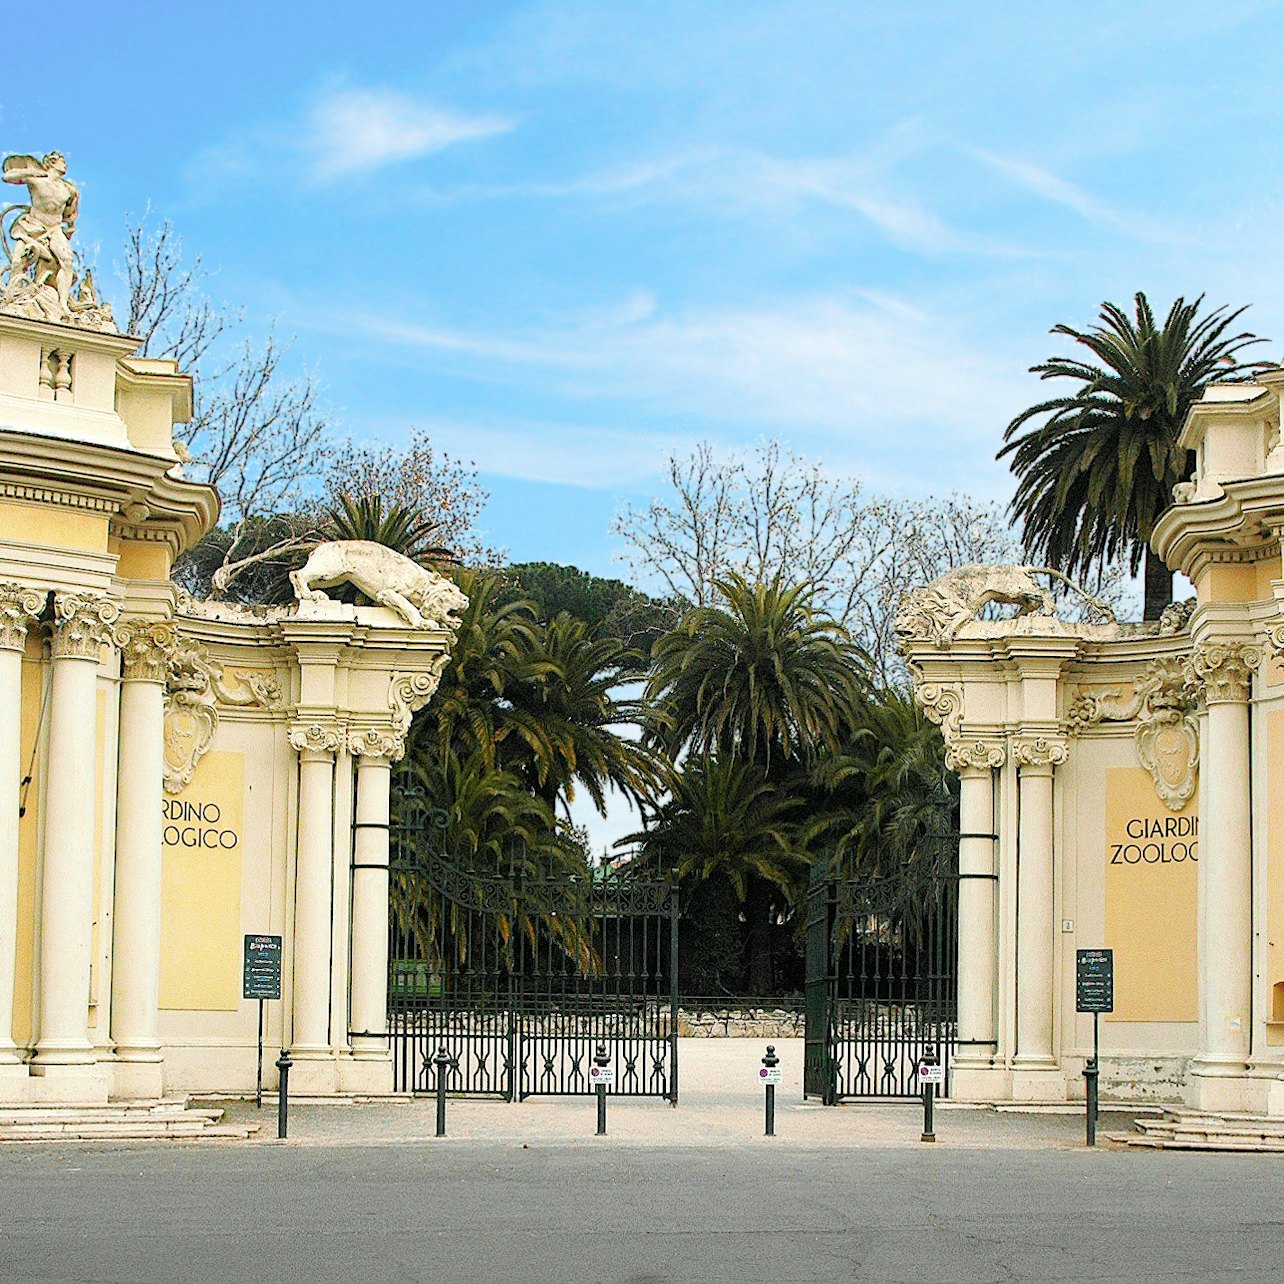 Bioparco: The Zoo of Rome - Accommodations in Rome